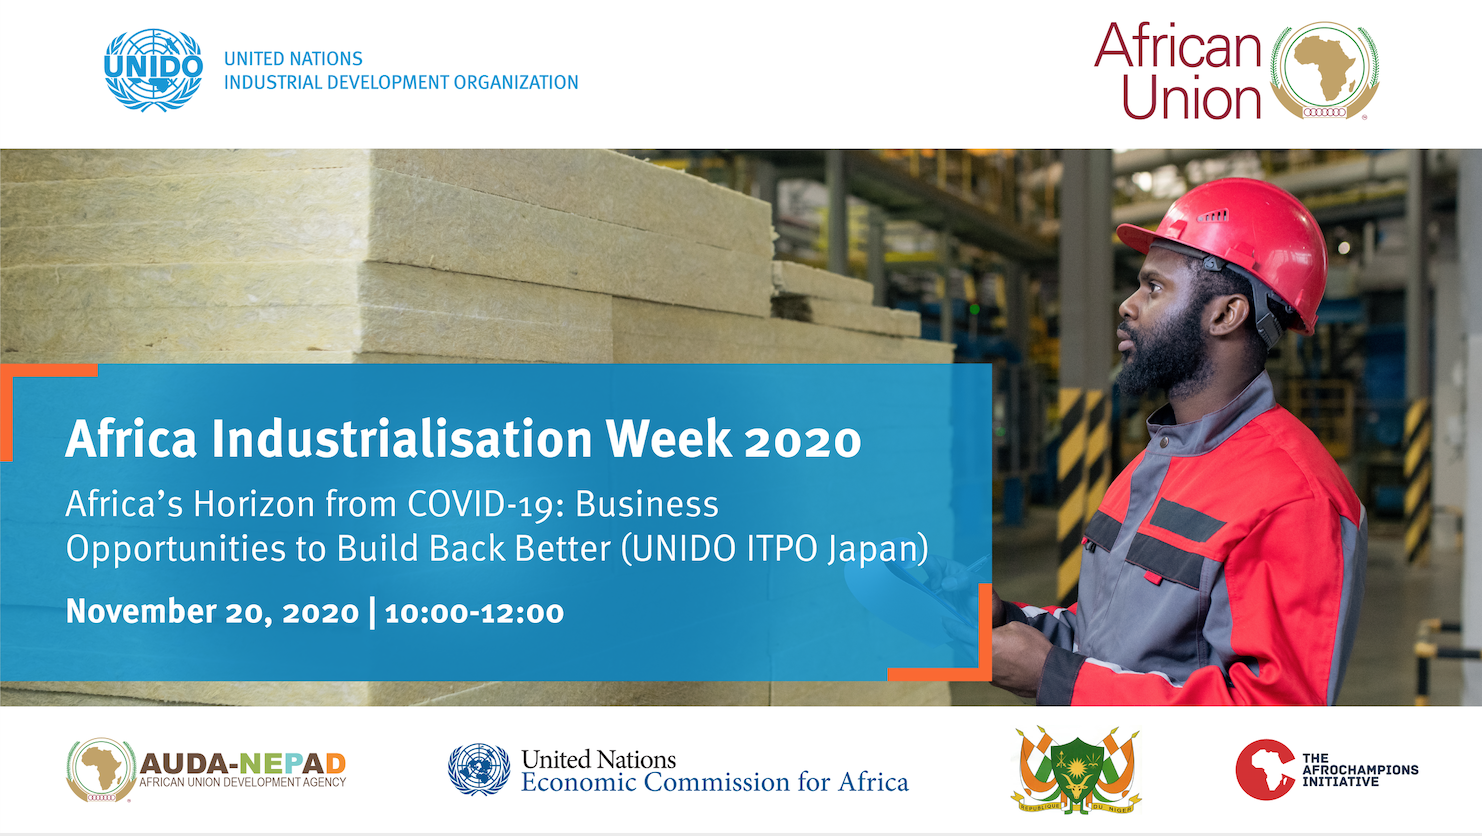 AIW2020- Africa's Horizon from COVID-19: Business Opportunities to Build Back Better (UNIDO ITPO Japan)